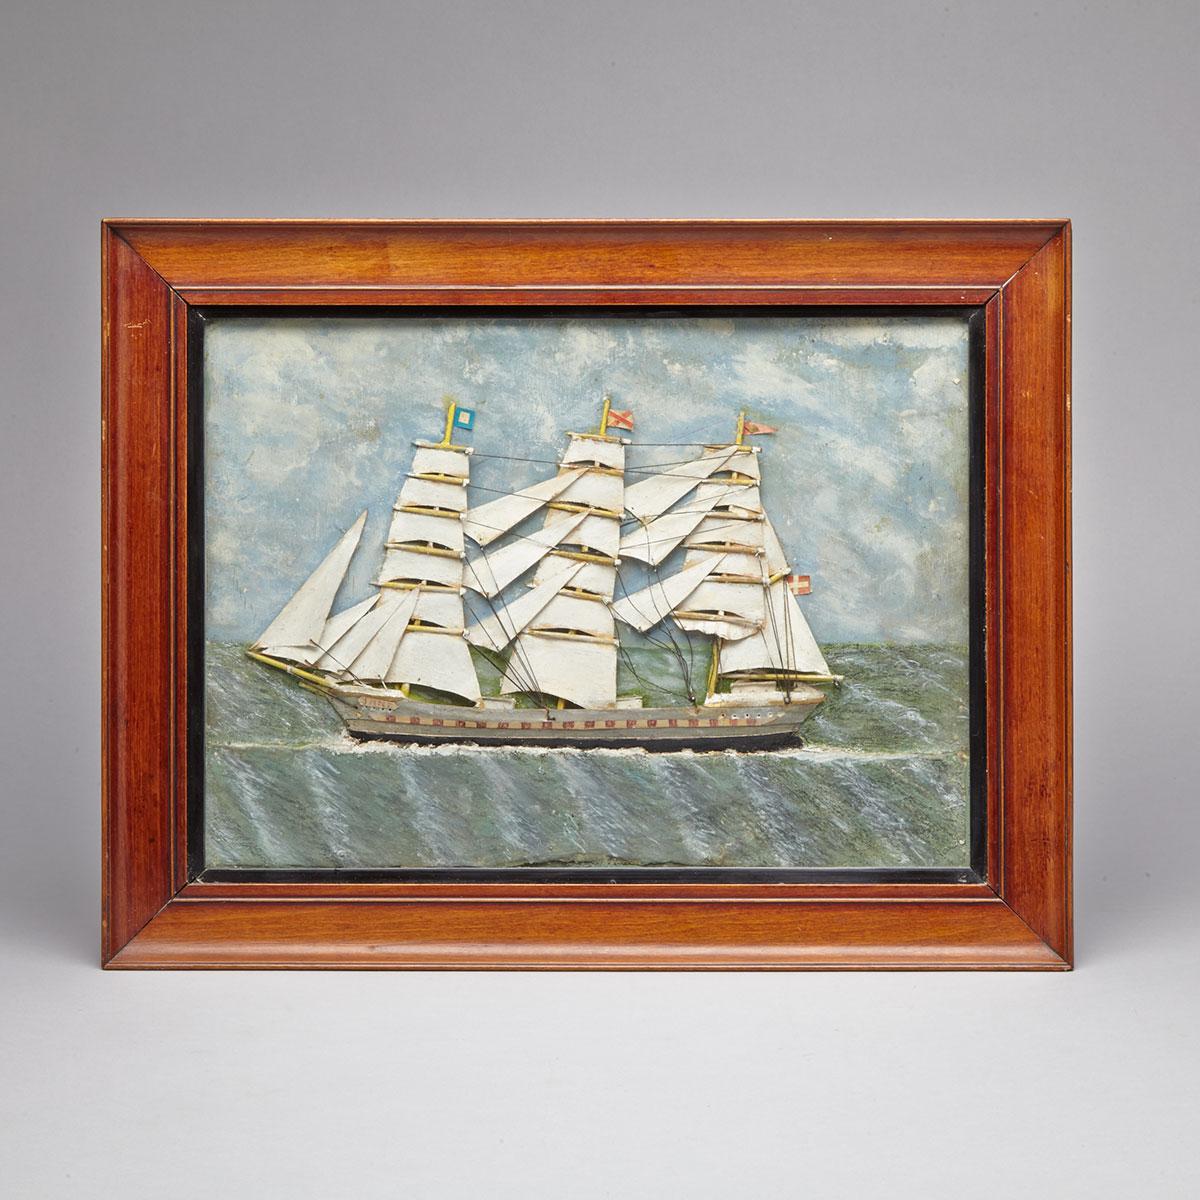 East Coast Shallow Diorama of a Frigate, early-mid 20th century